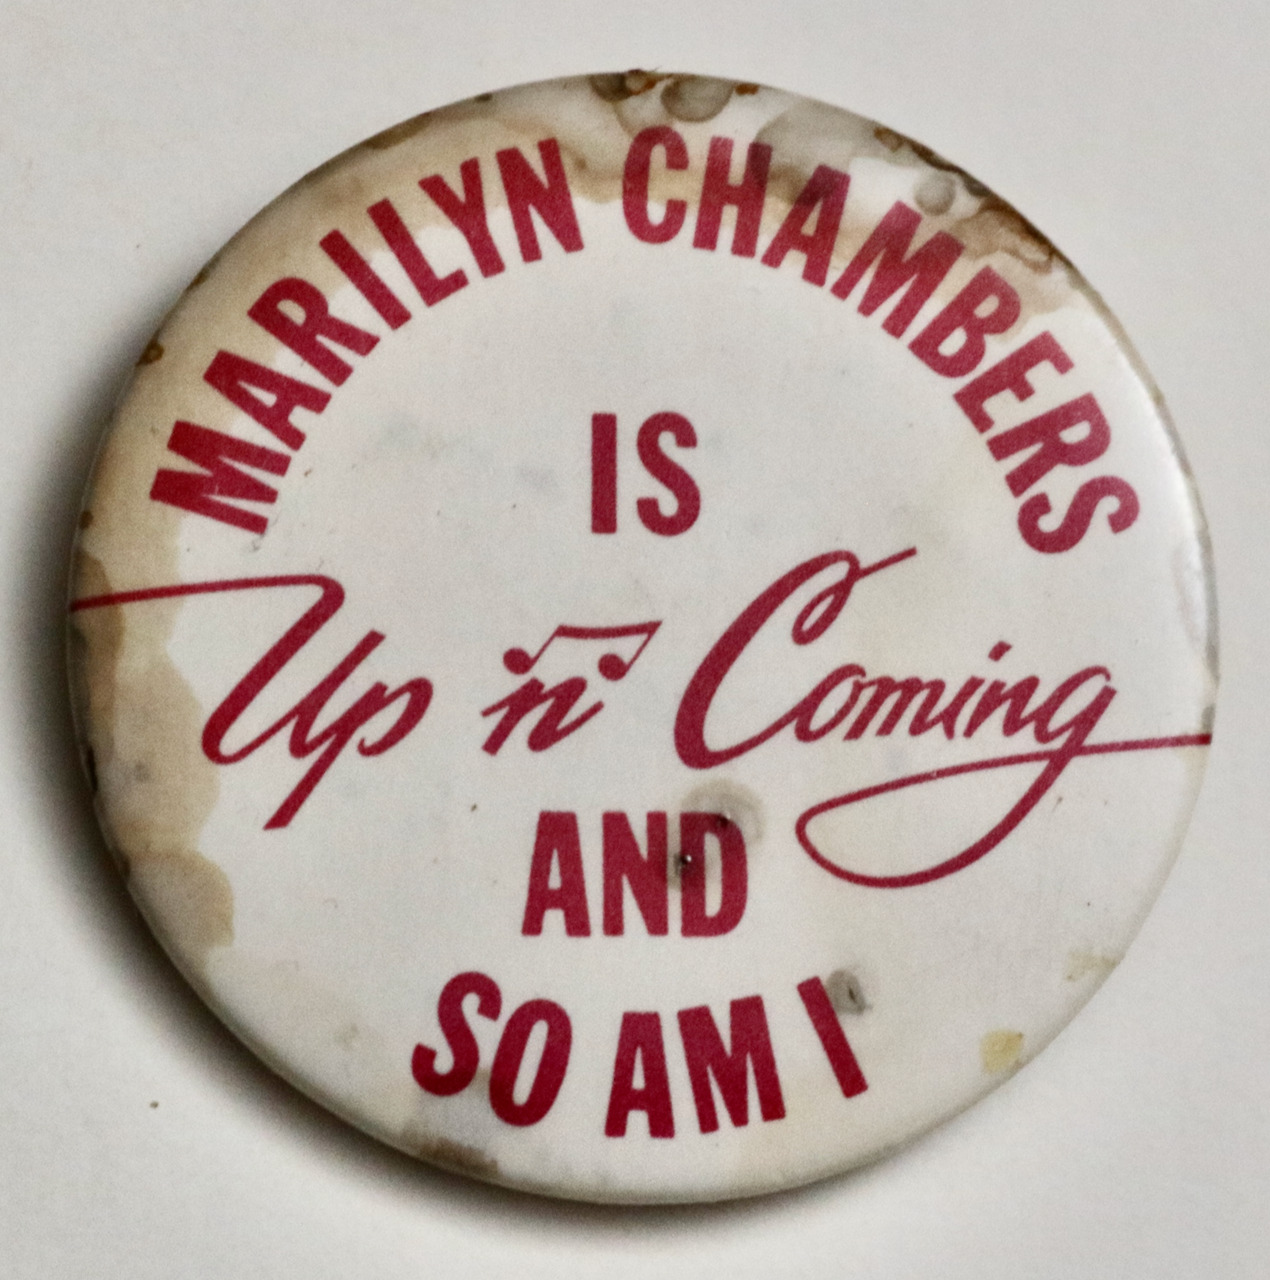 MARILYN CHAMBERS Up 'N' Coming vintage 1983 promo badge pin